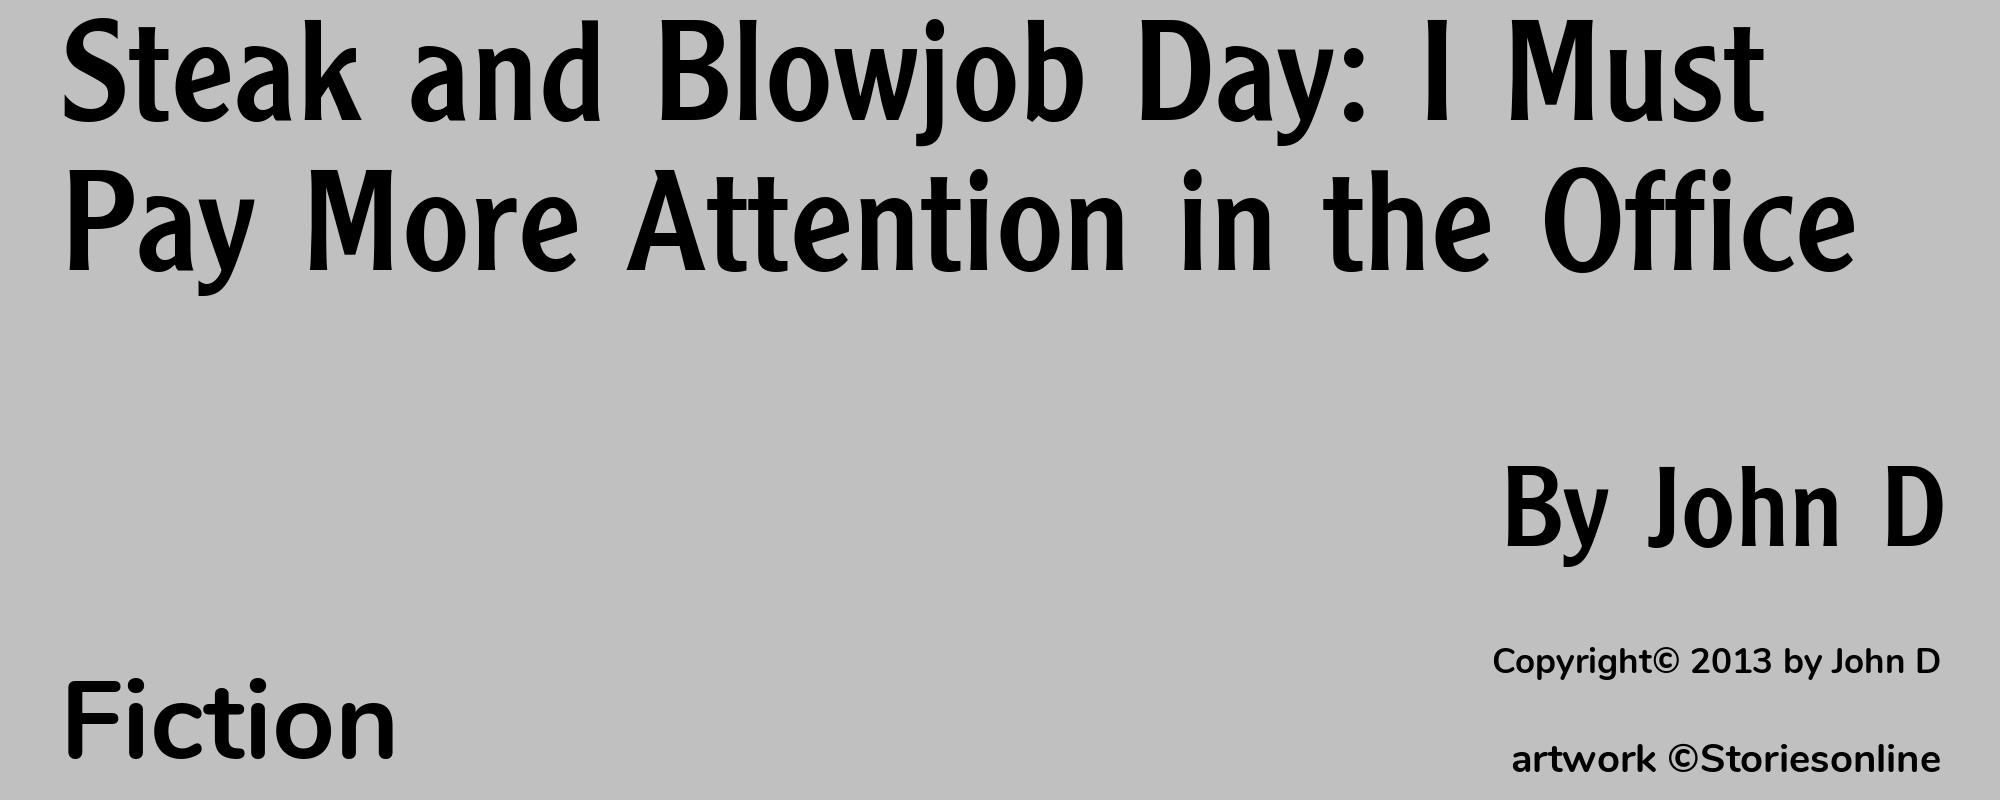 Steak and Blowjob Day: I Must Pay More Attention in the Office - Cover